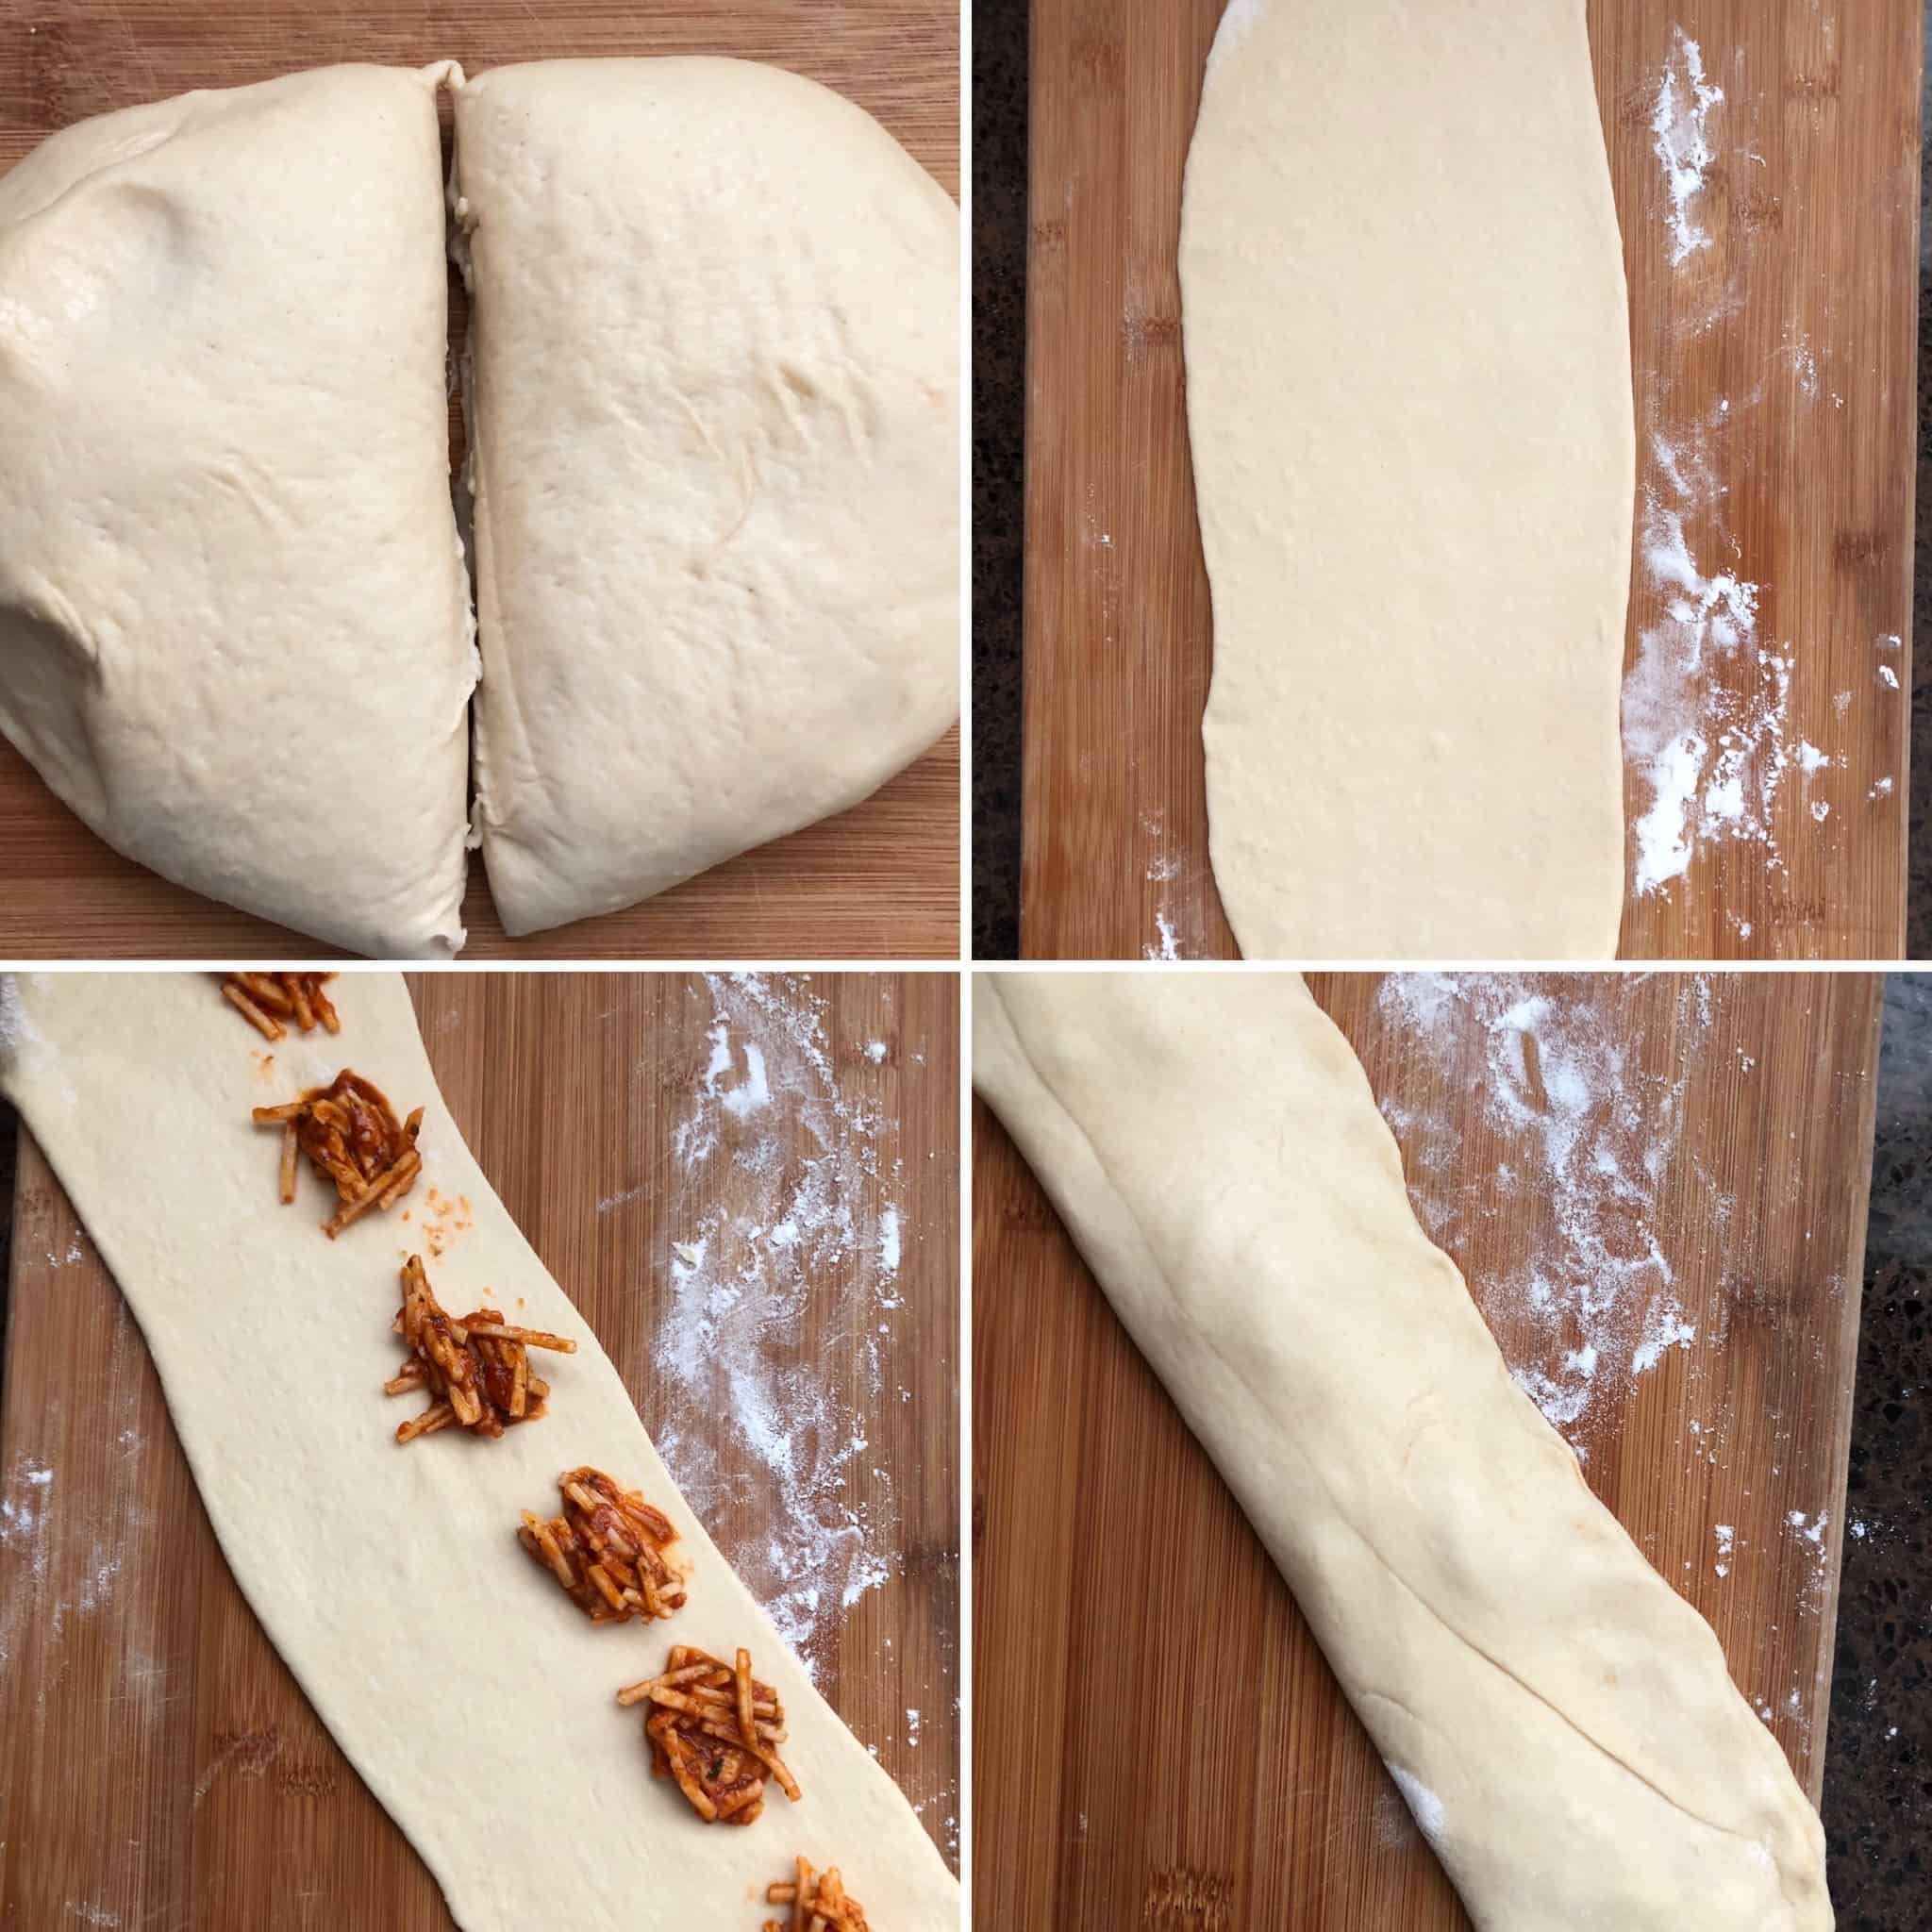 Pizza dough rolled out into a log and topped with cheese filling